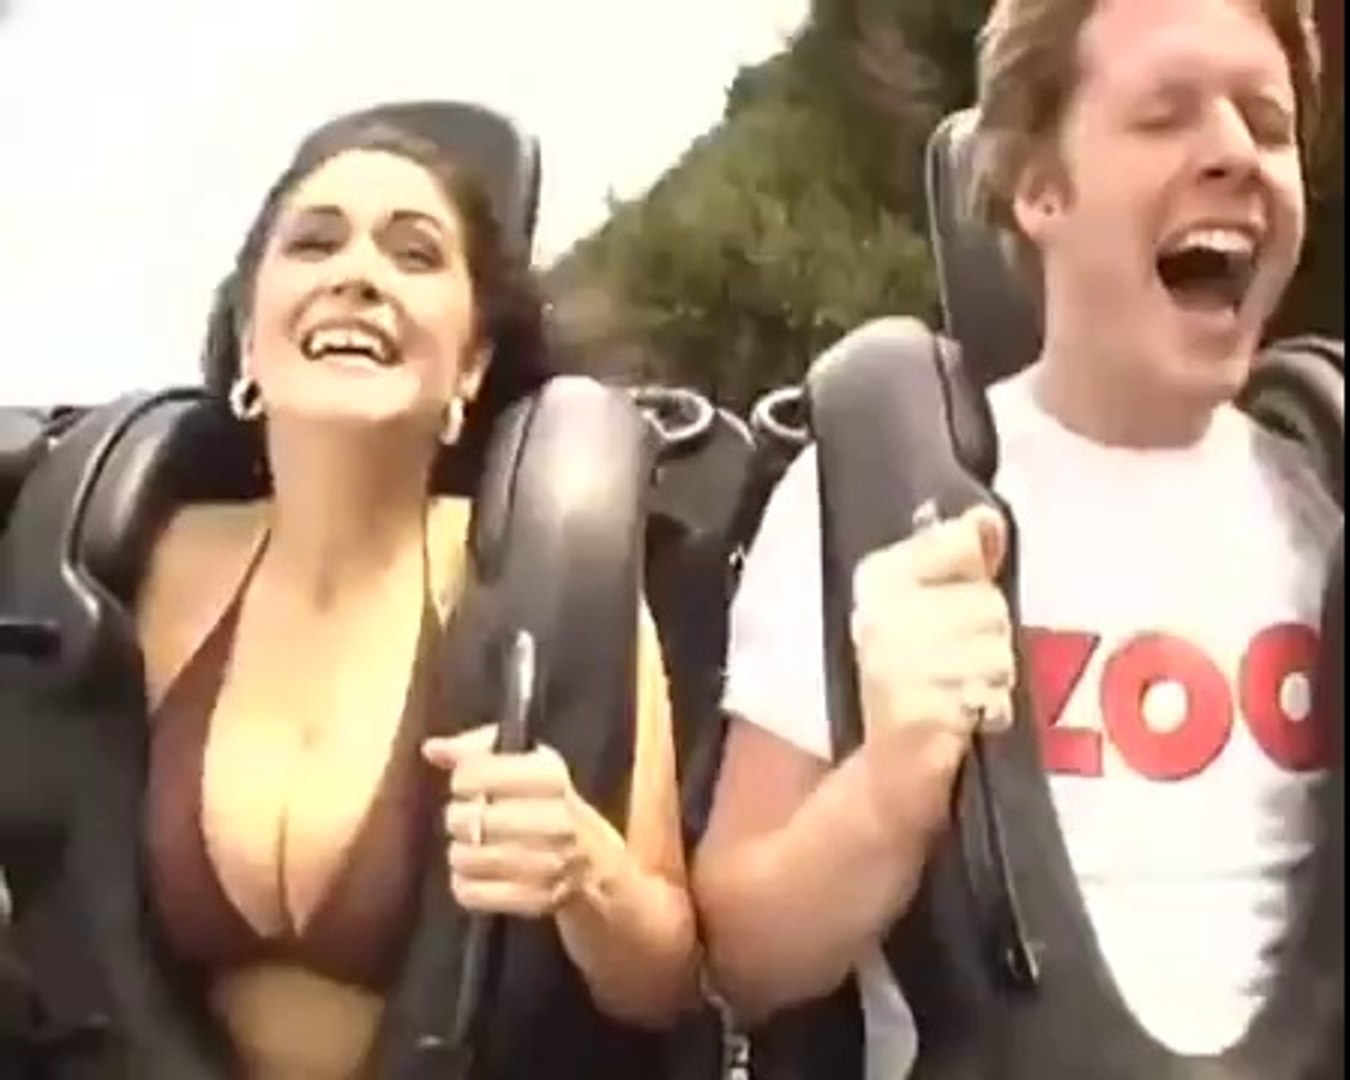 Boobs fall out on sling shot